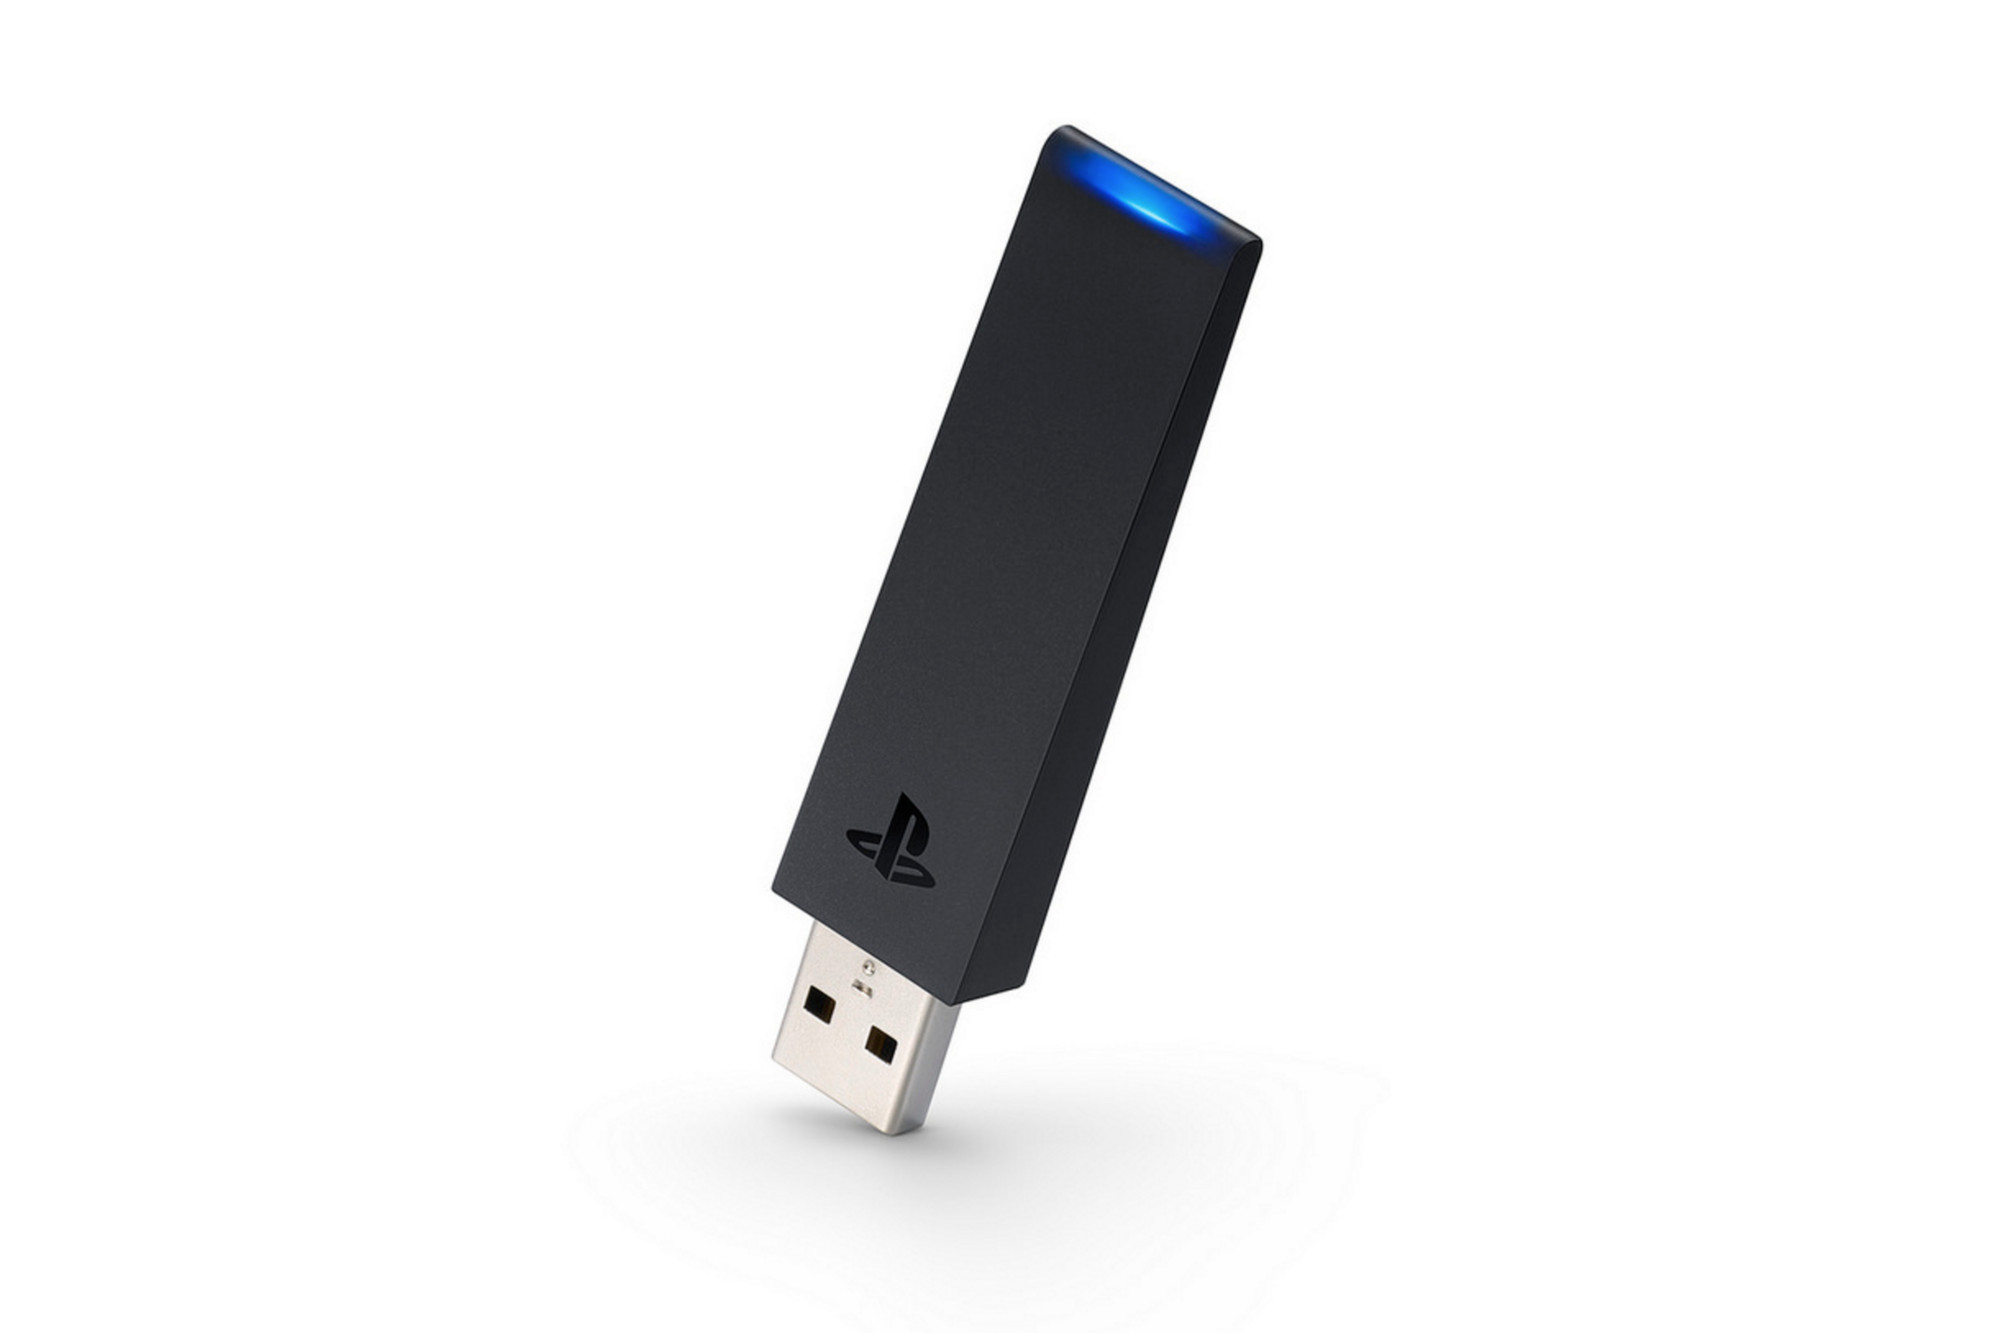 USB dongle adds DualShock support to PC and Mac - The Verge